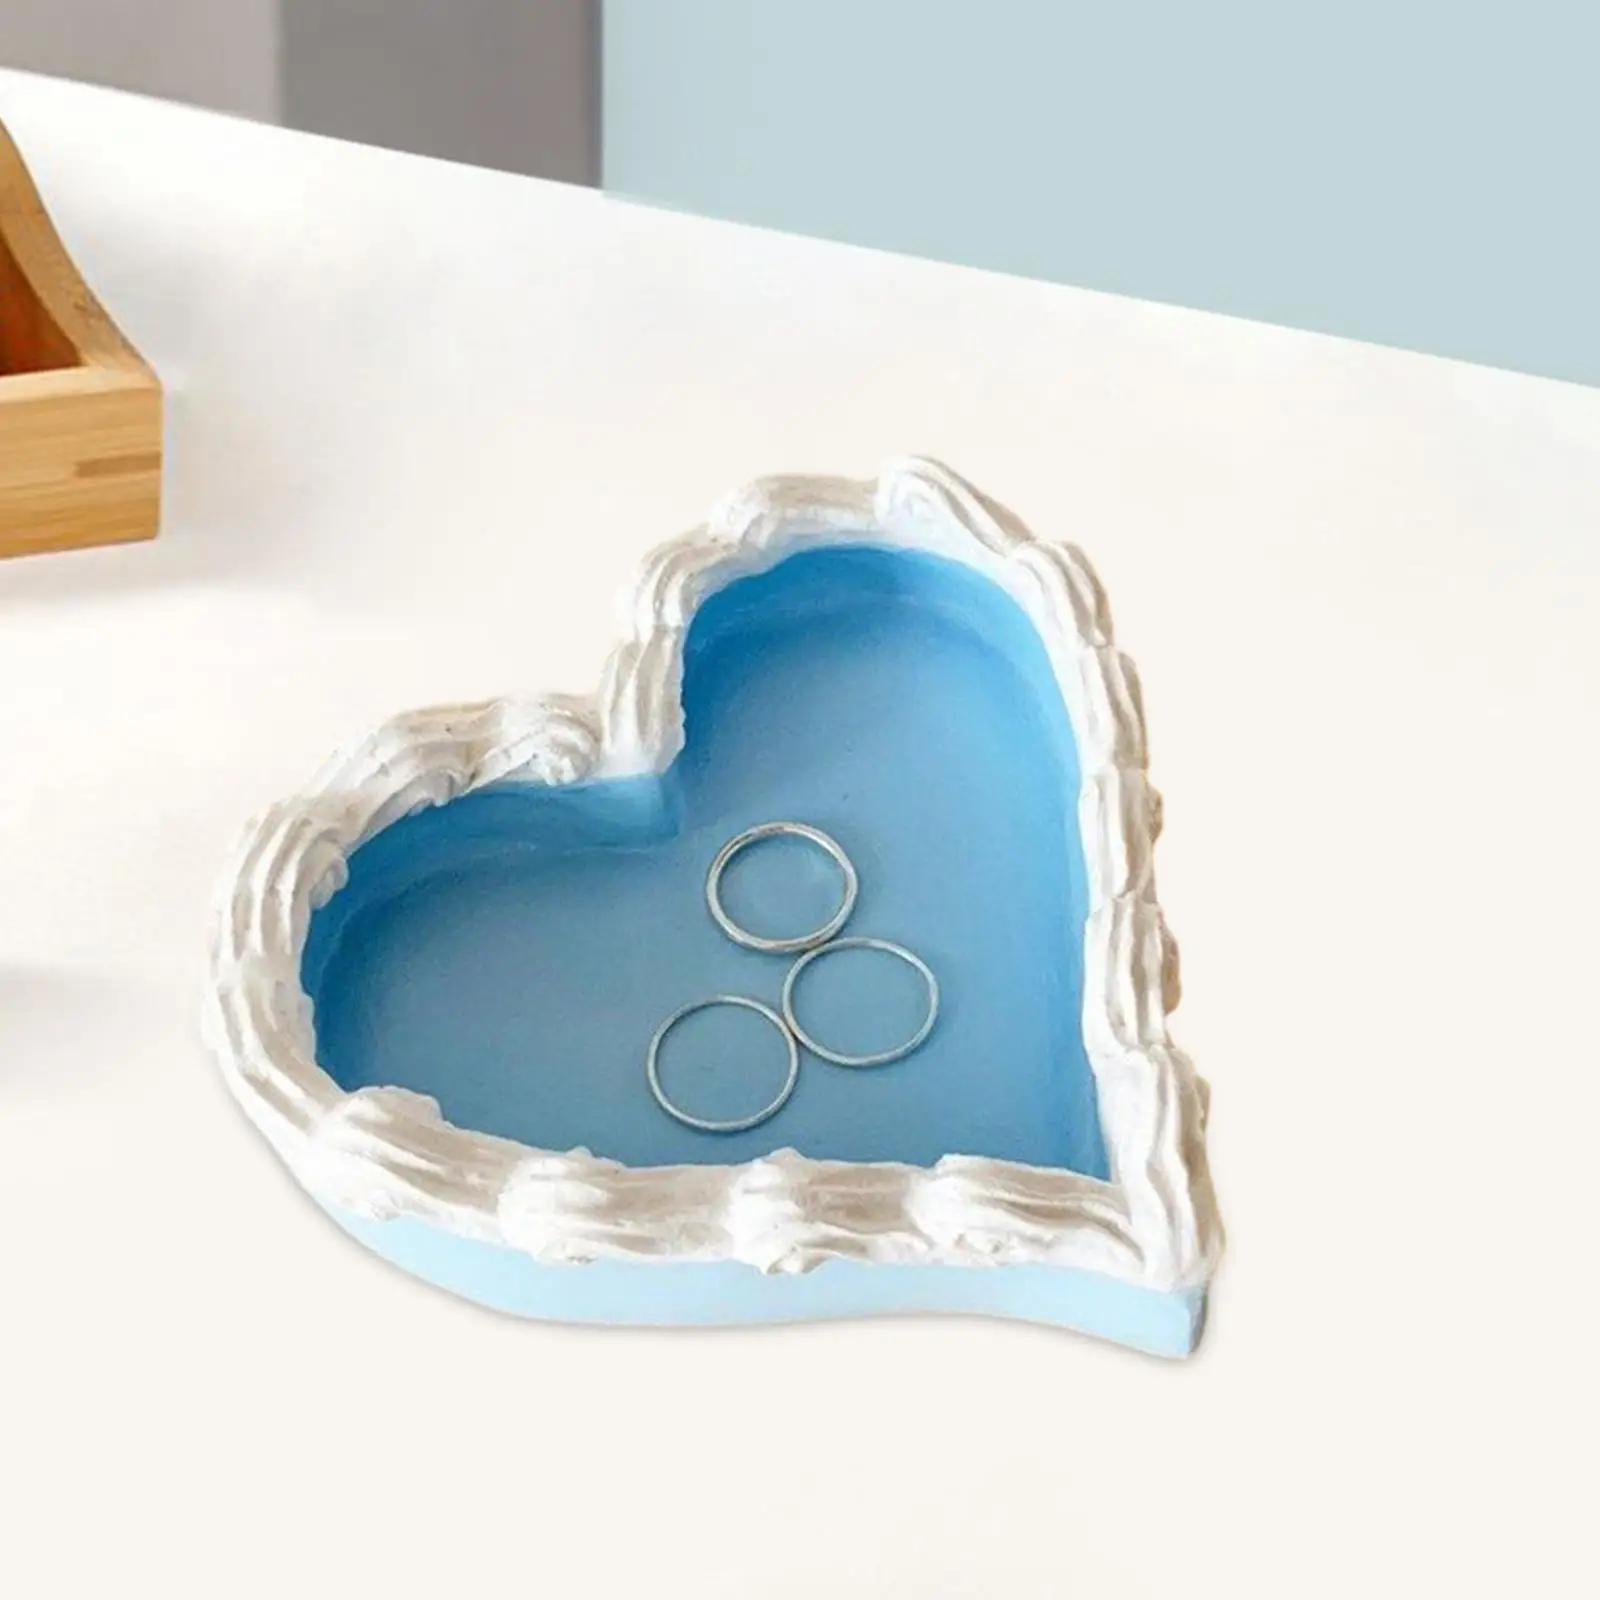 Heart Shaped Jewelry Tray Multifunction Display Plate Storage Ring Dish for Office Desktop Bedroom Table Centerpieces Wedding